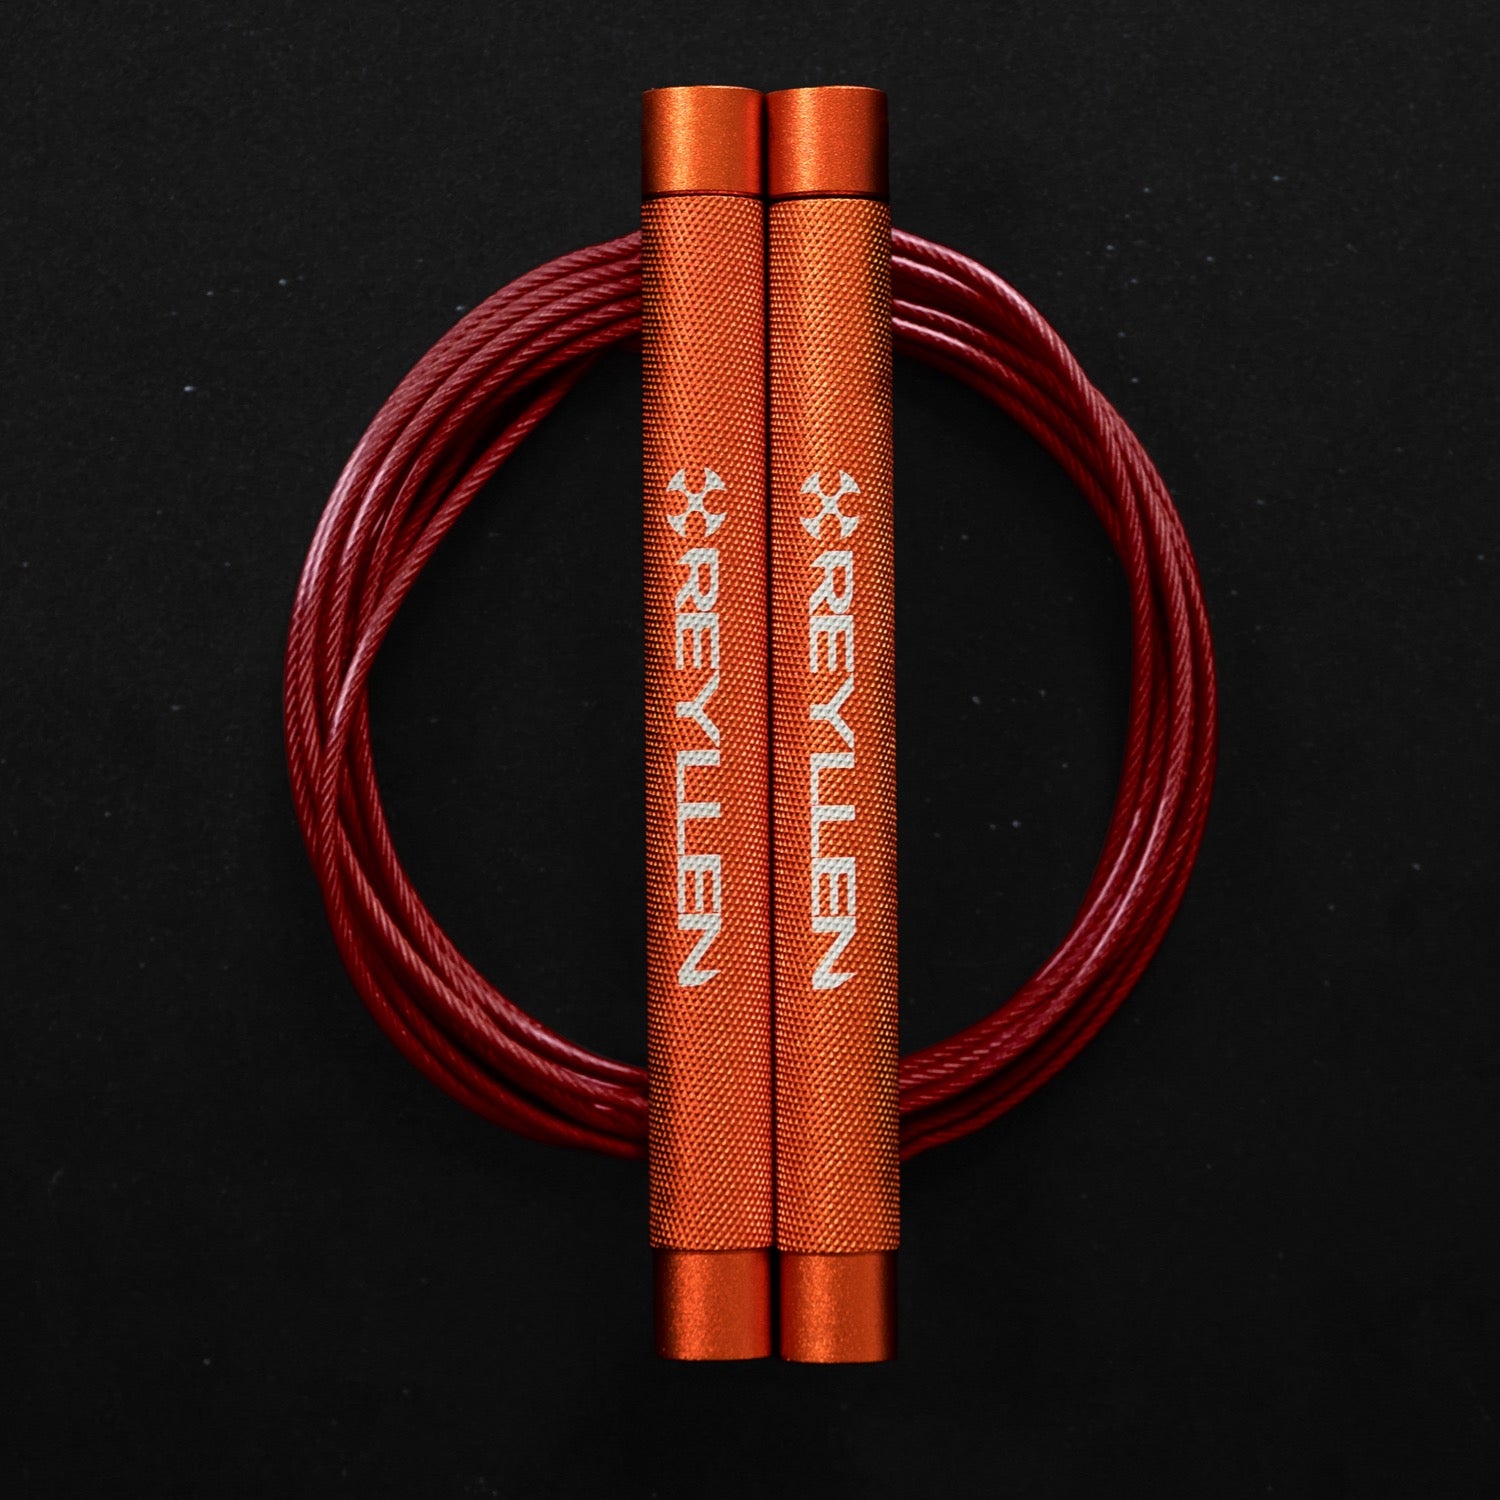 Reyllen Flare Mx Speed Skipping Jump Rope - Aluminium Handles - orange with red pvc cable